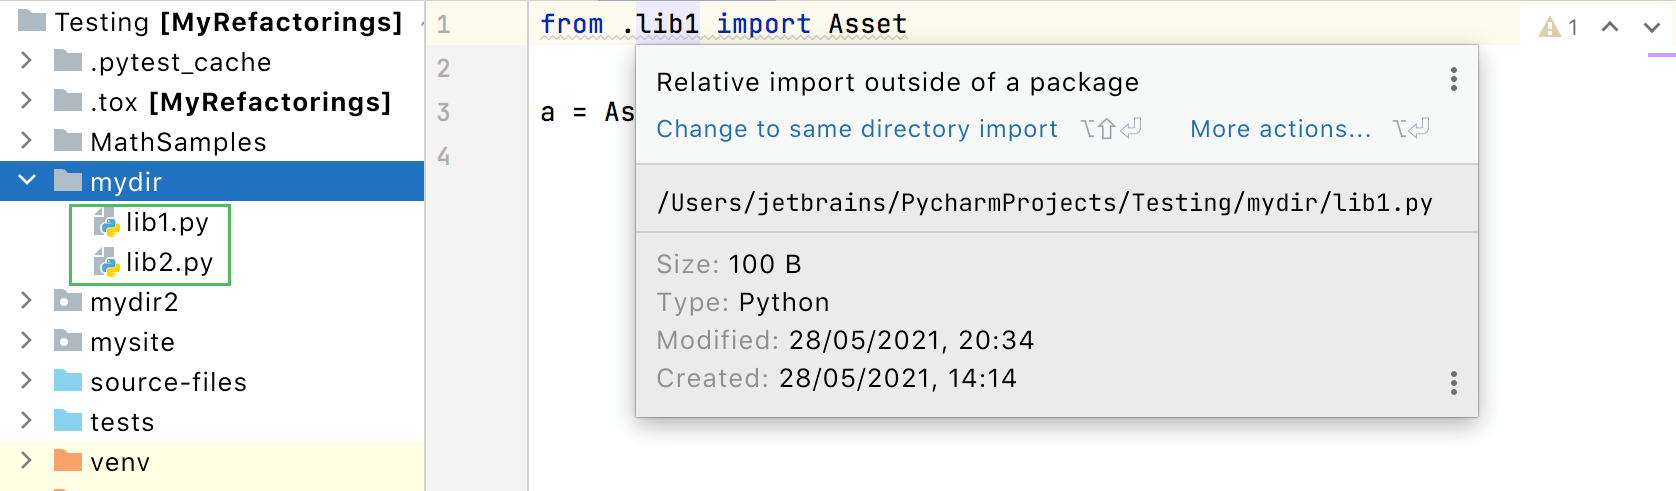 Relative import outside of the package